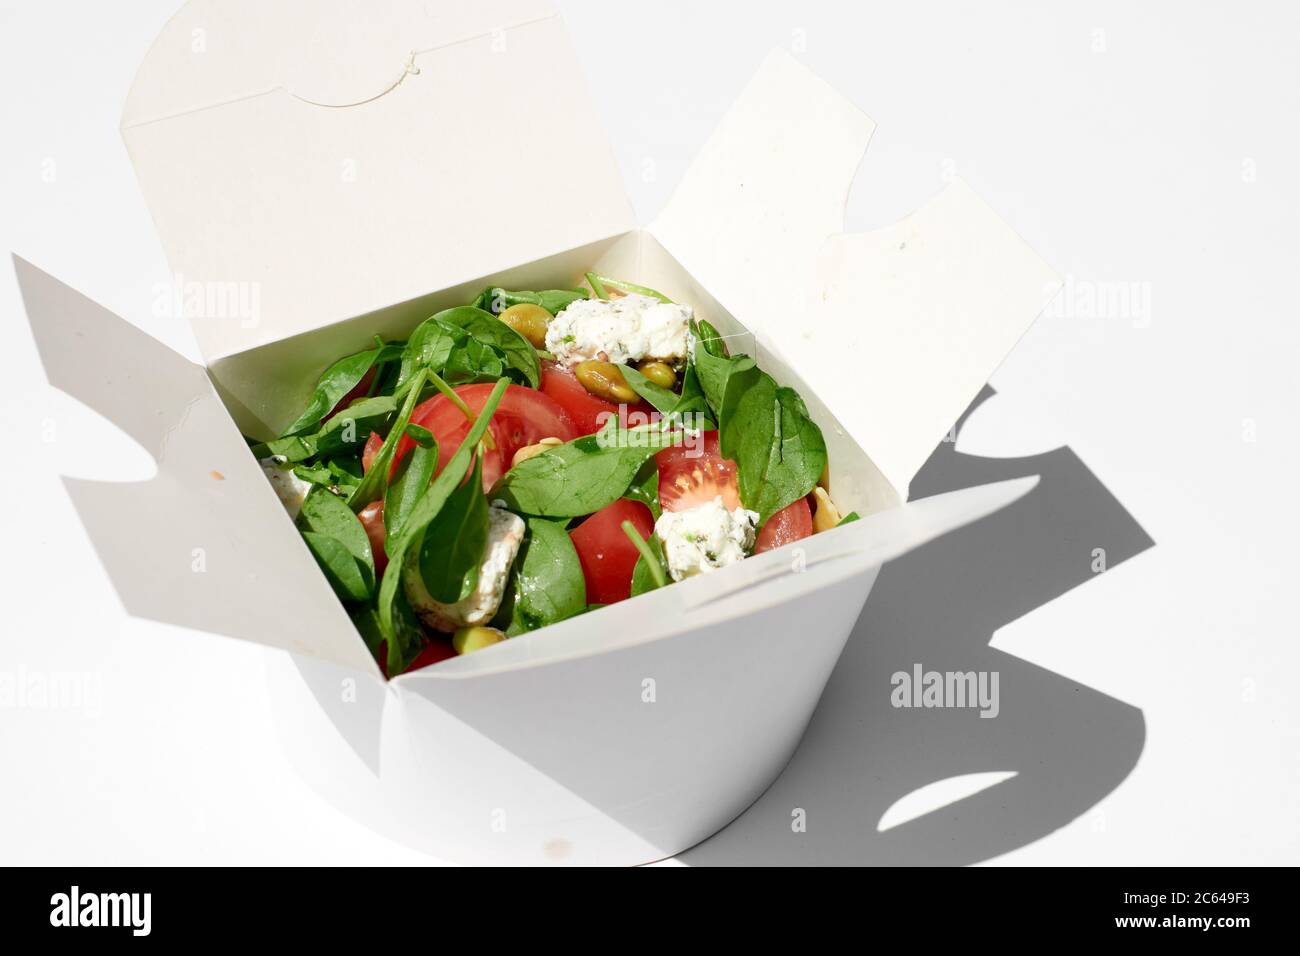 White paper food box, fast food. Take away food delivery. Takeout summer salad. Stock Photo